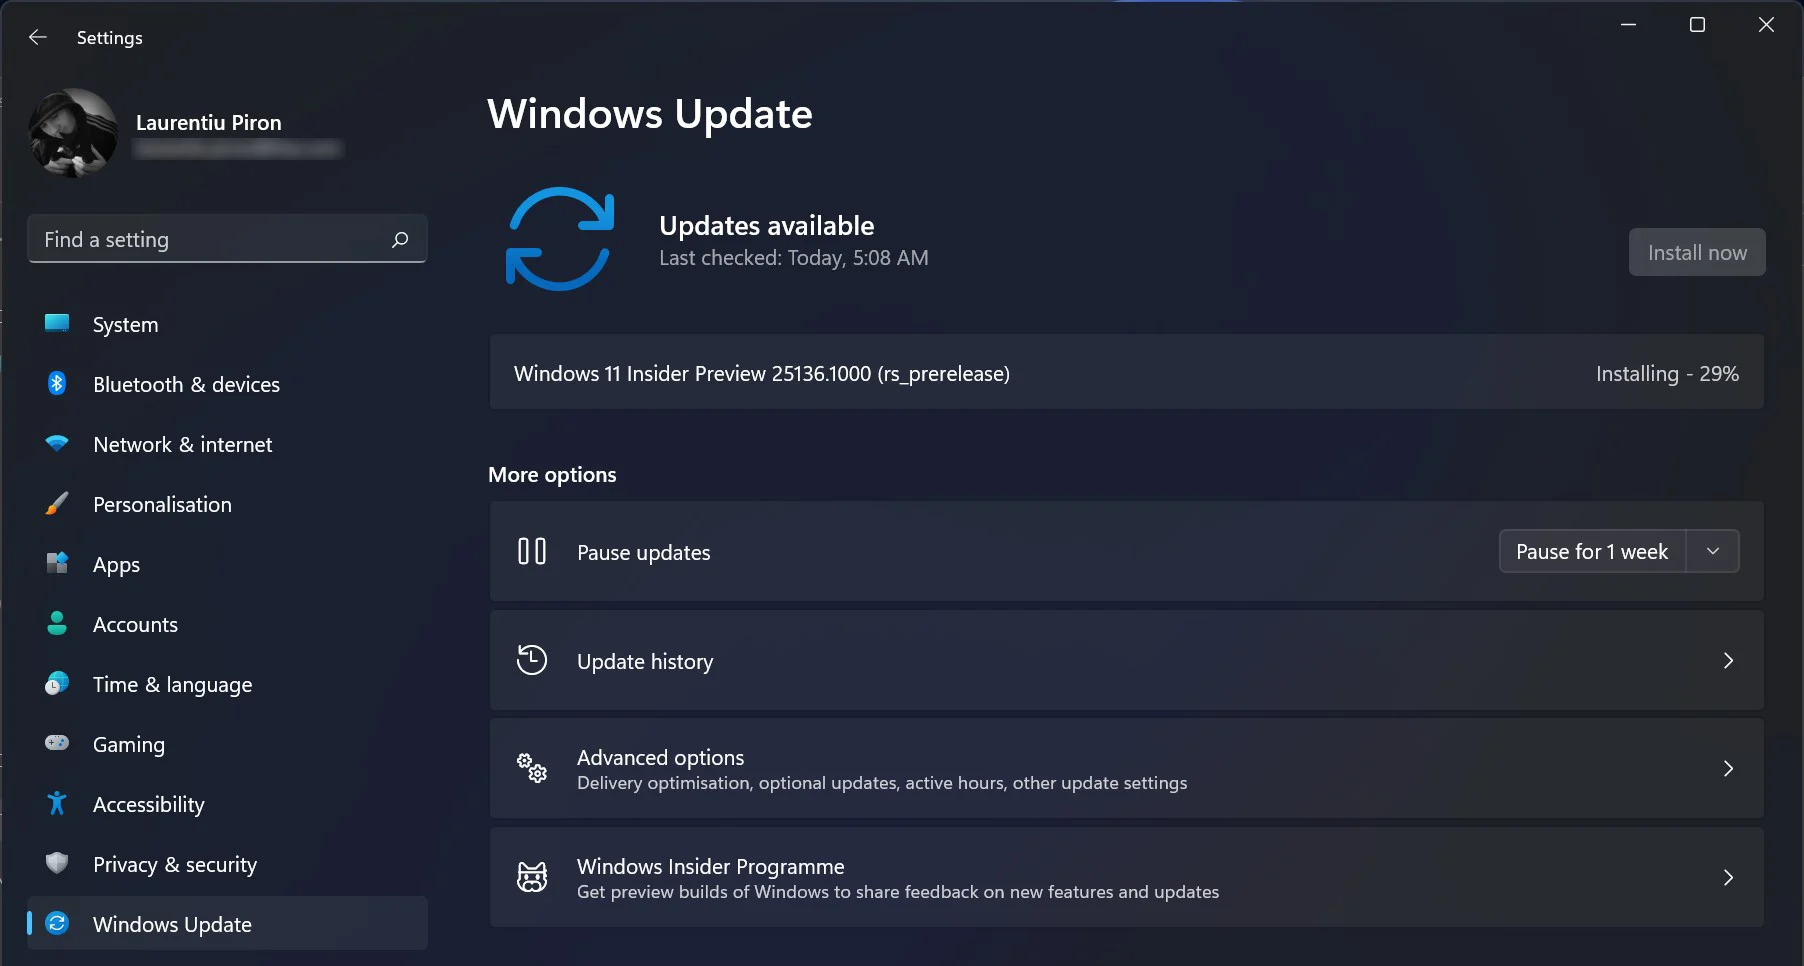 Install Windows 11 Insider Preview